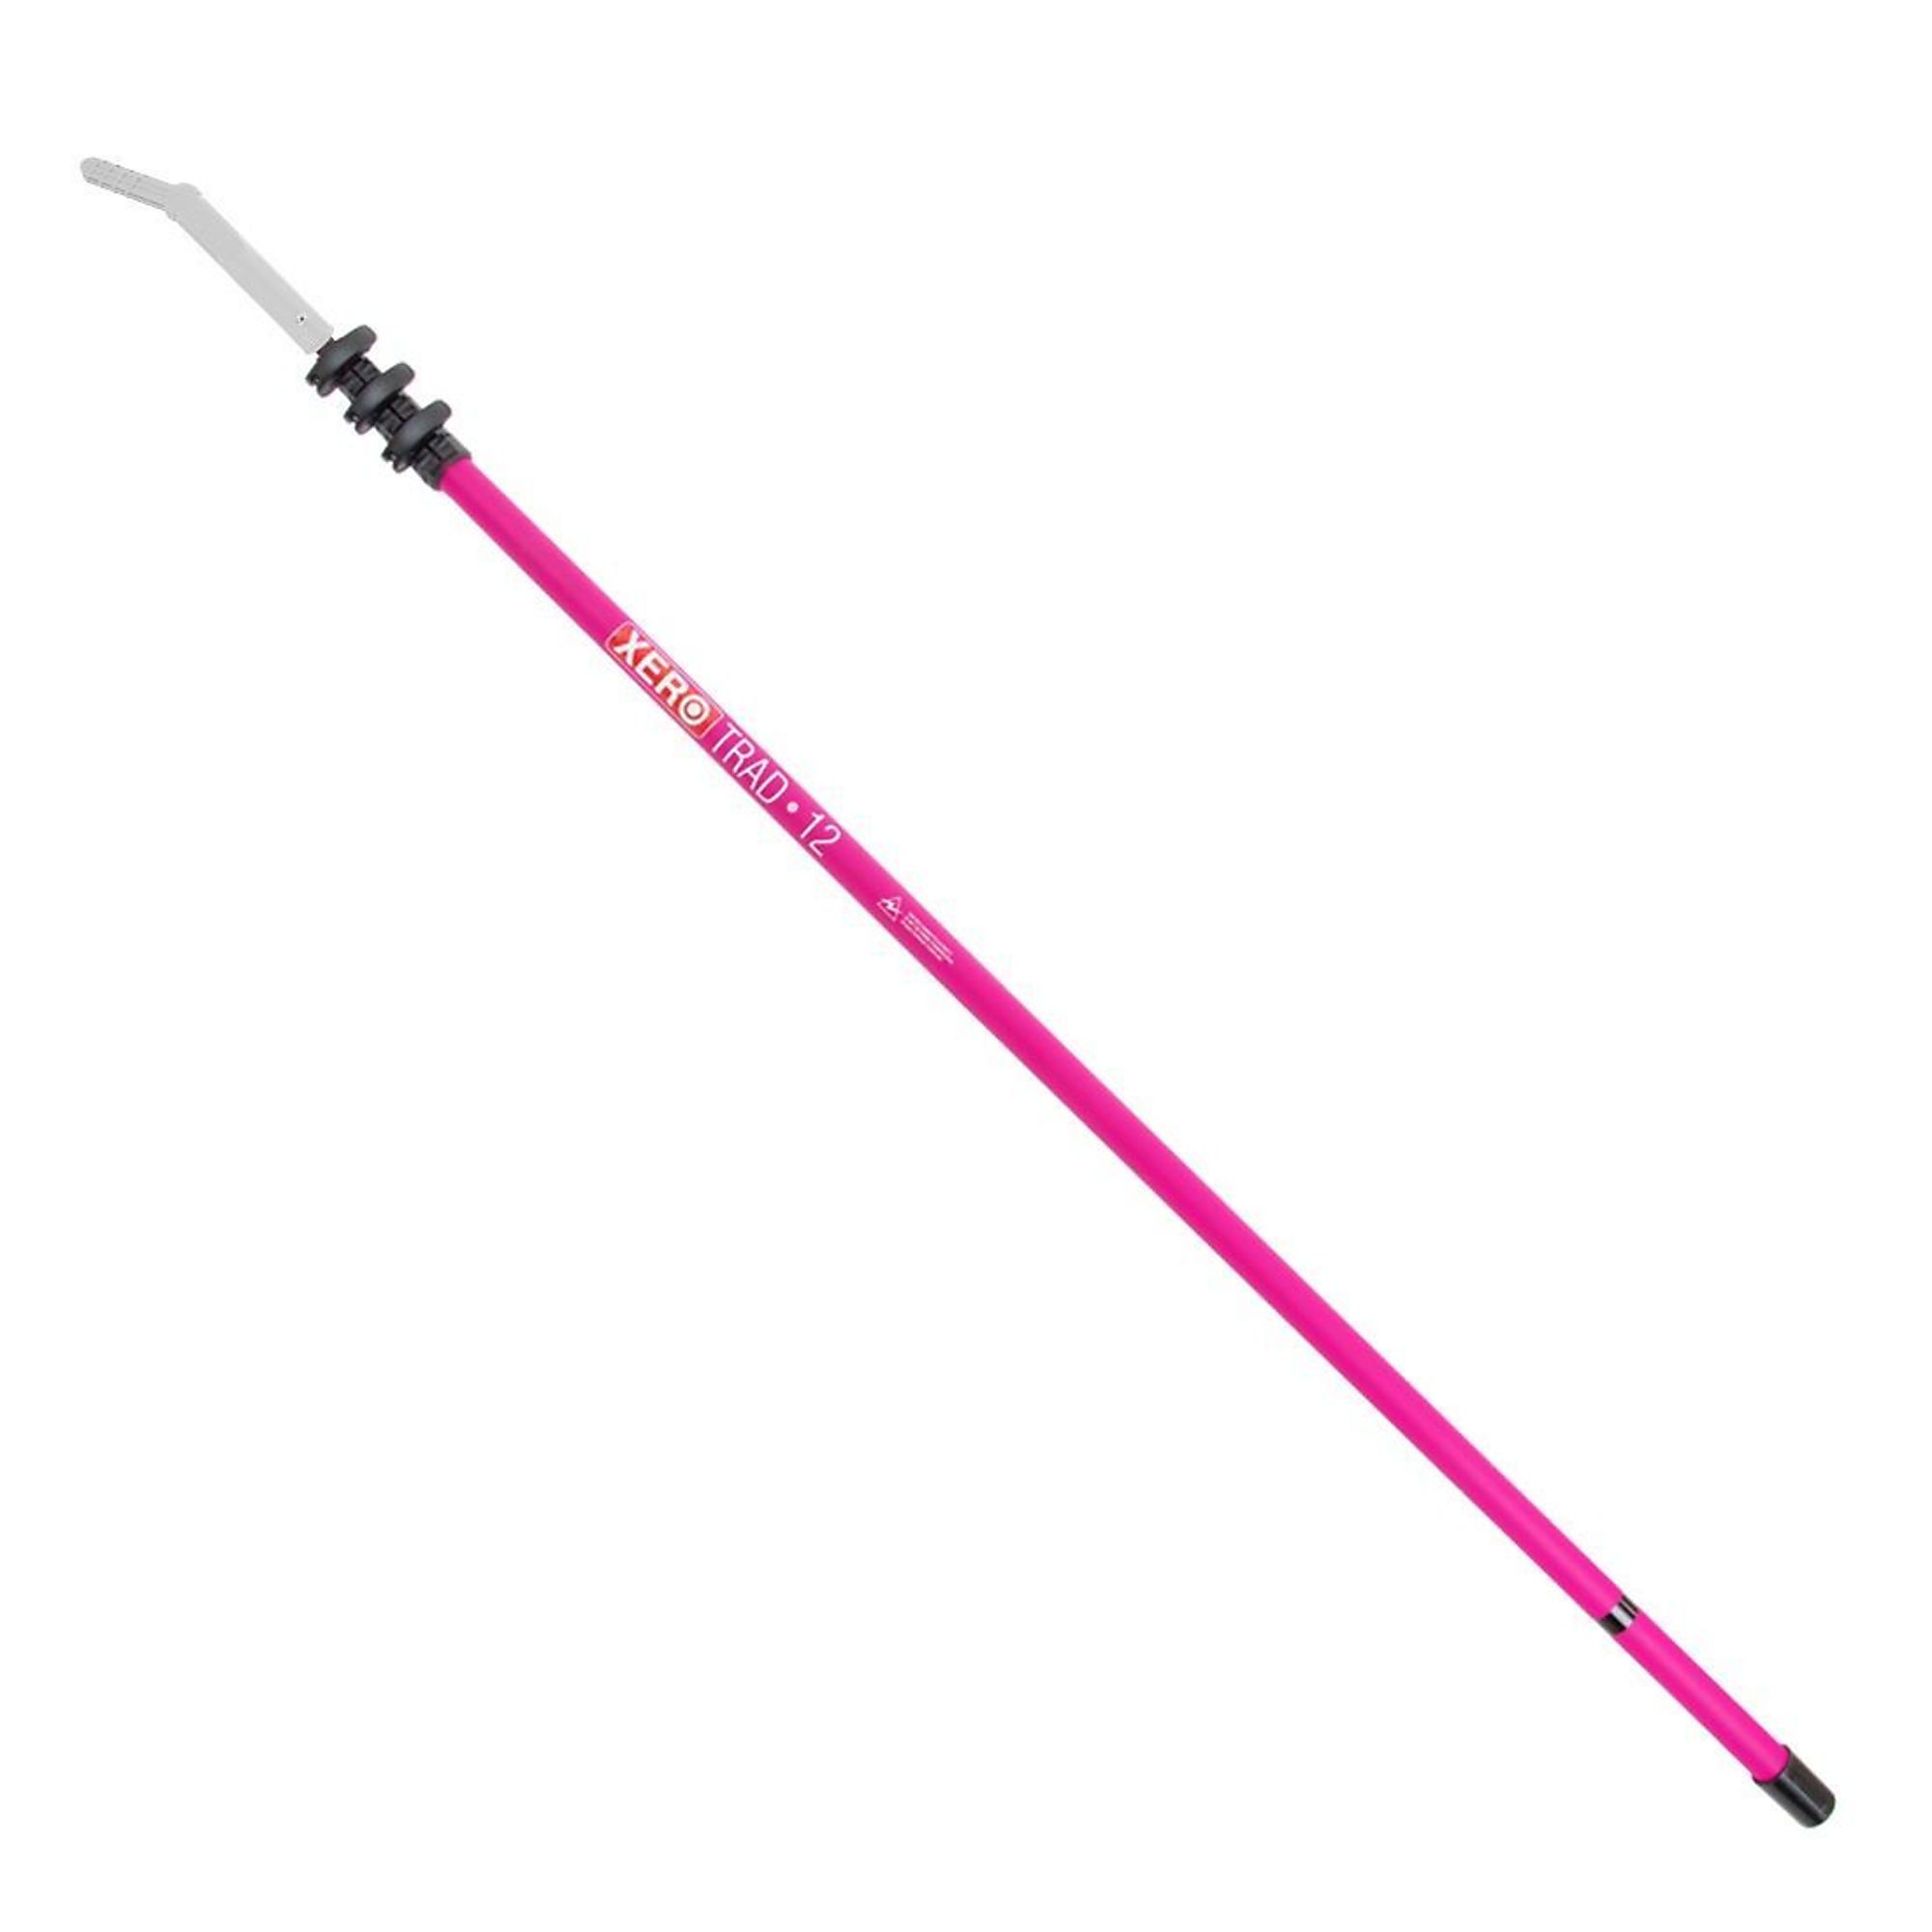 XERO, Trad Pole 2.0 Wagtail Tip - Hot Pink 12ft., Model 209-20-420